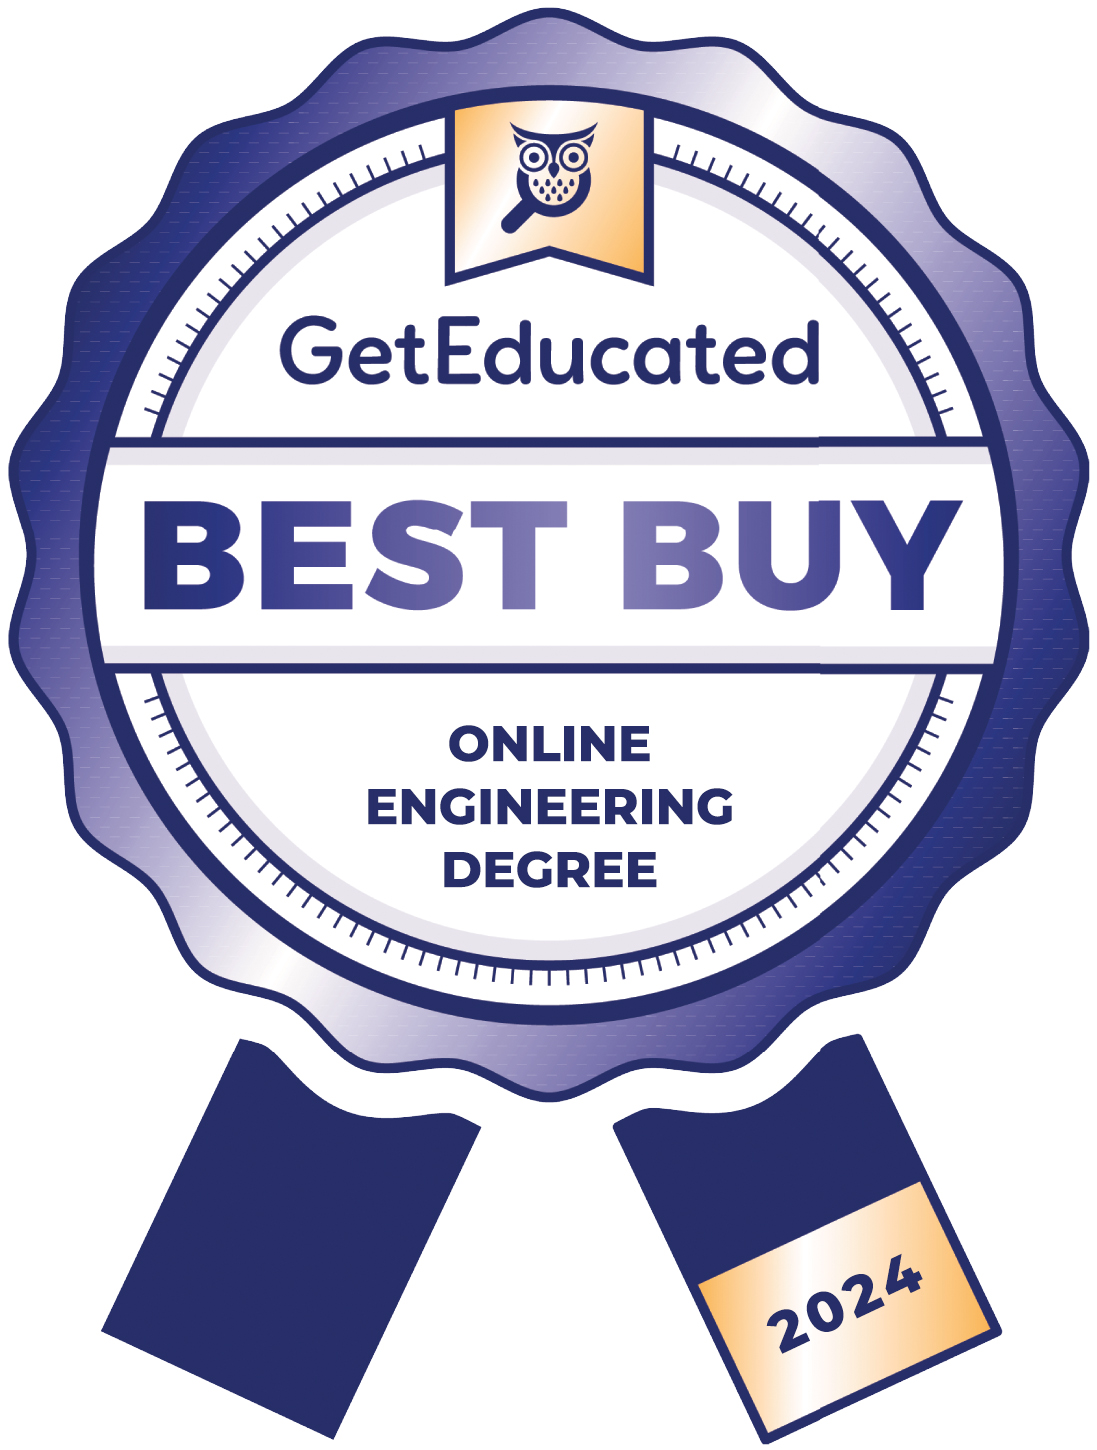 Rankings of the cheapest online engineering degree programs